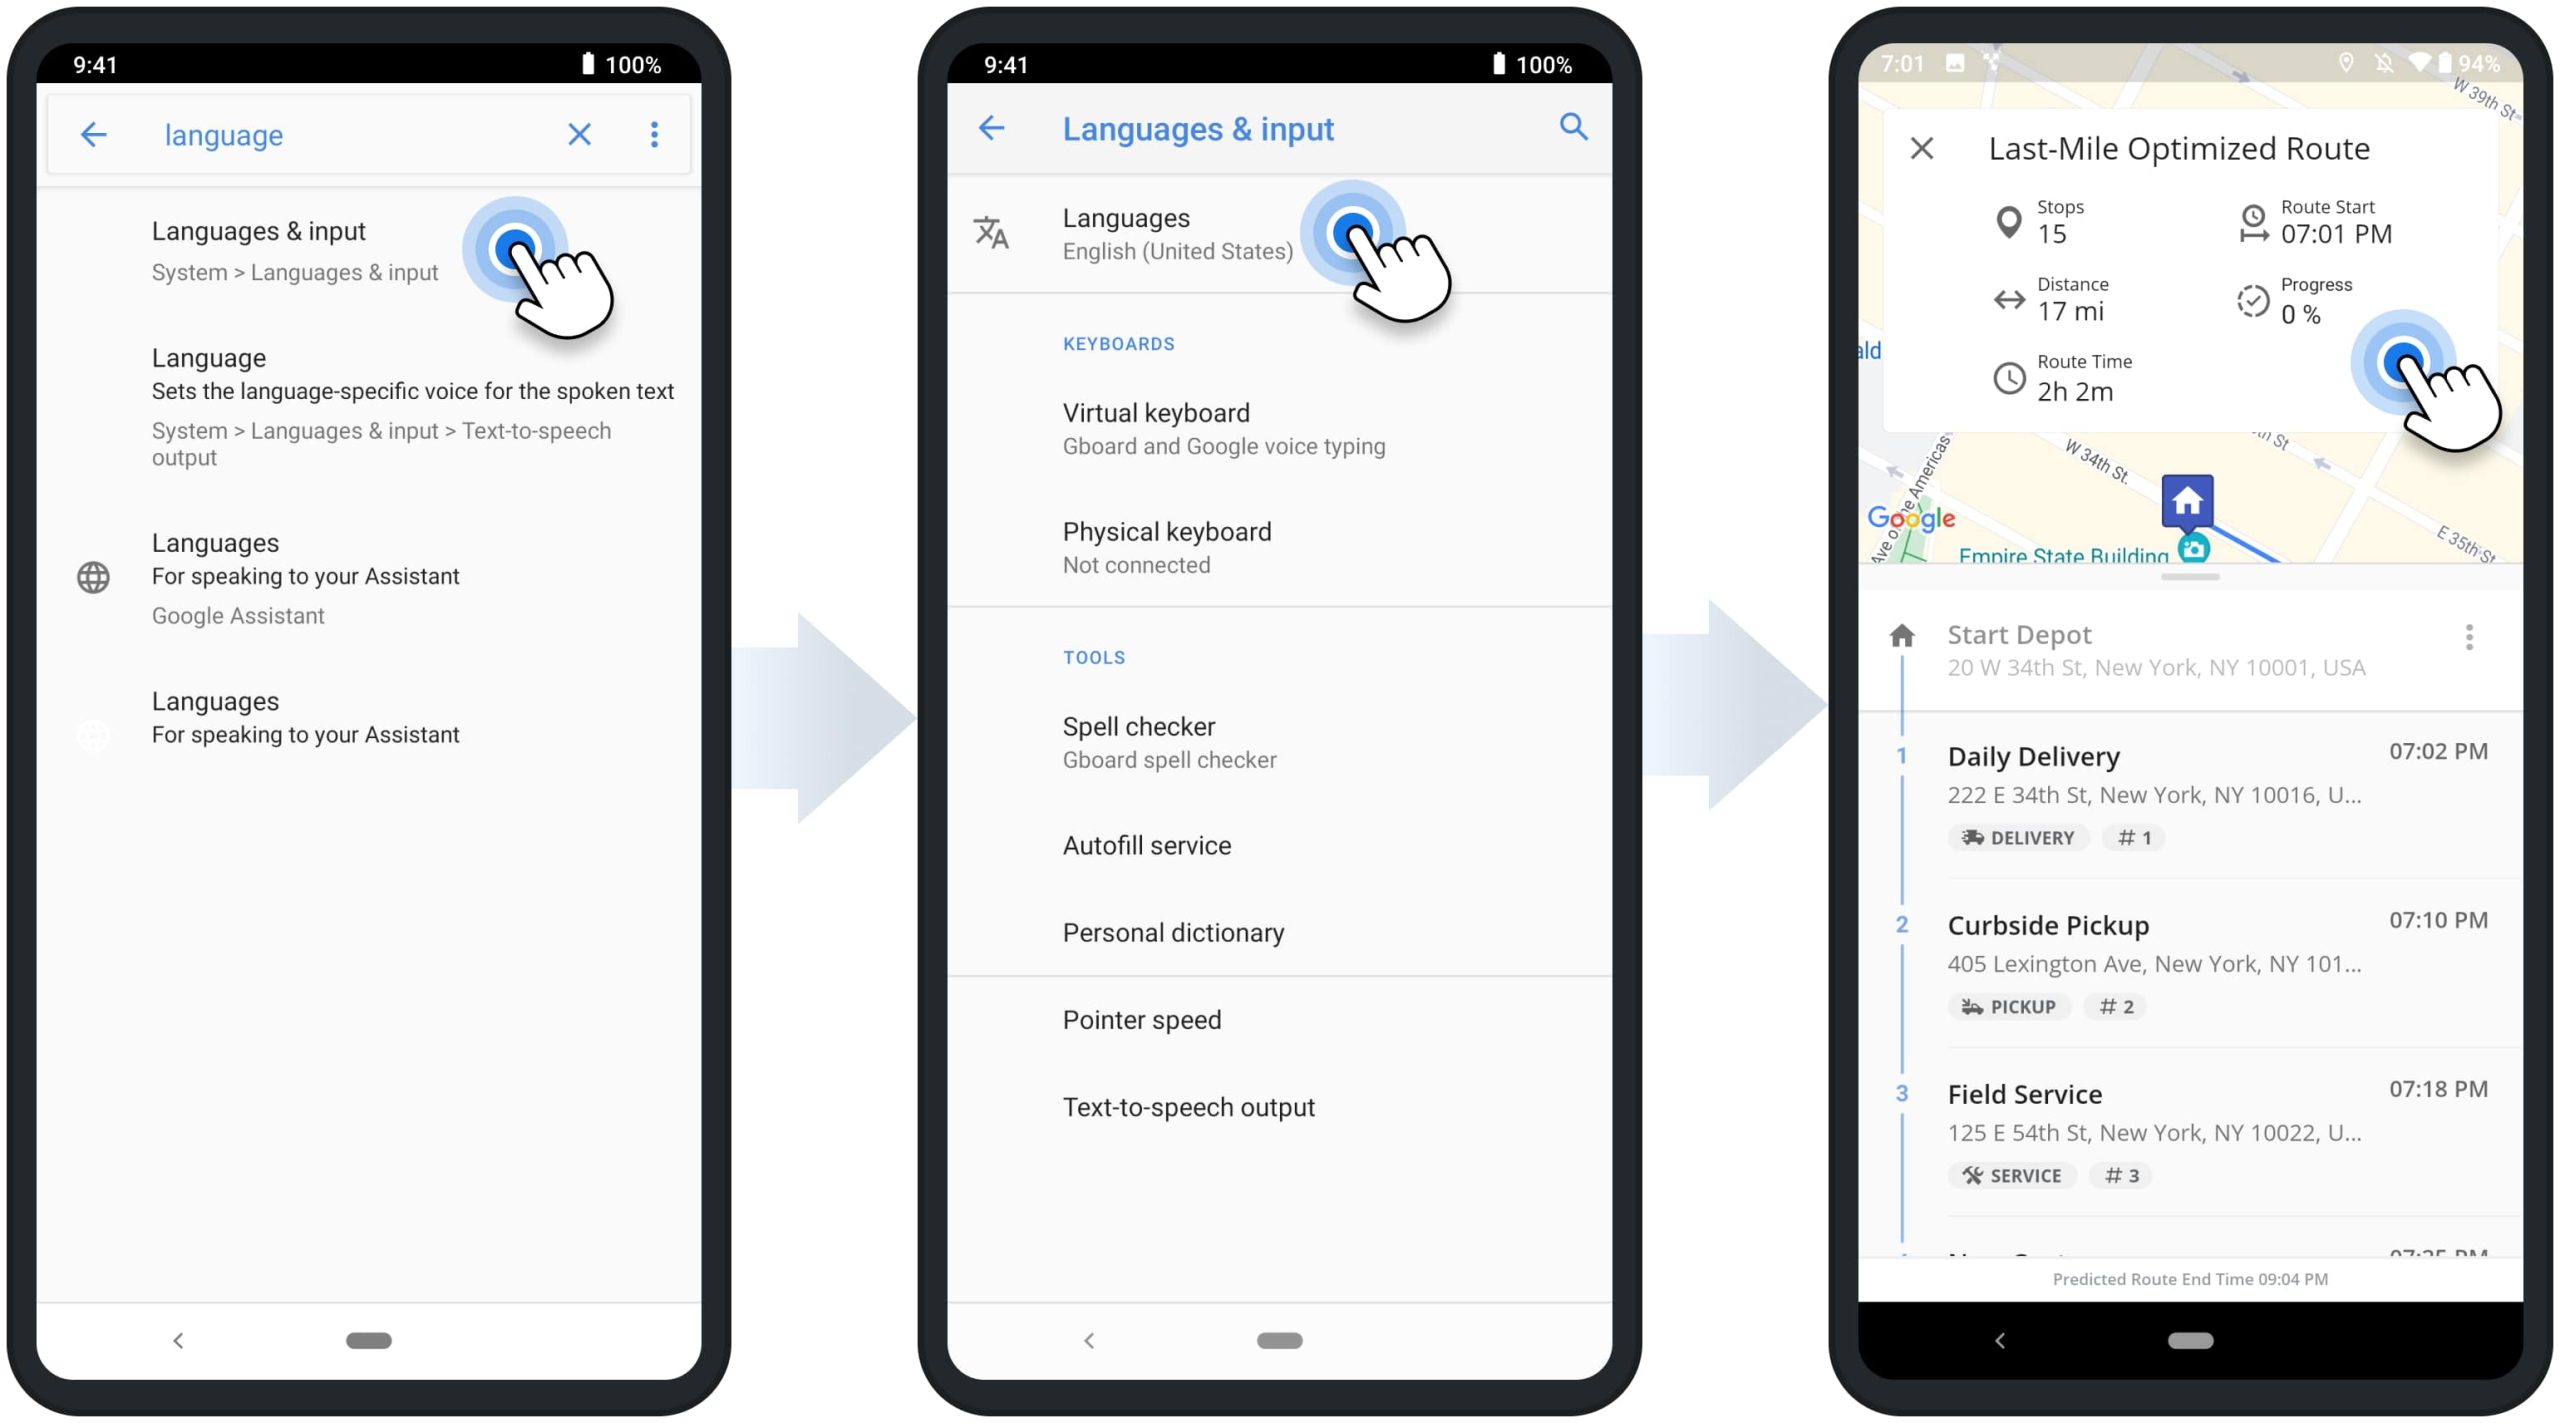 Language settings on Route4Me's Android Route Planner app are automatically set based on the device language.